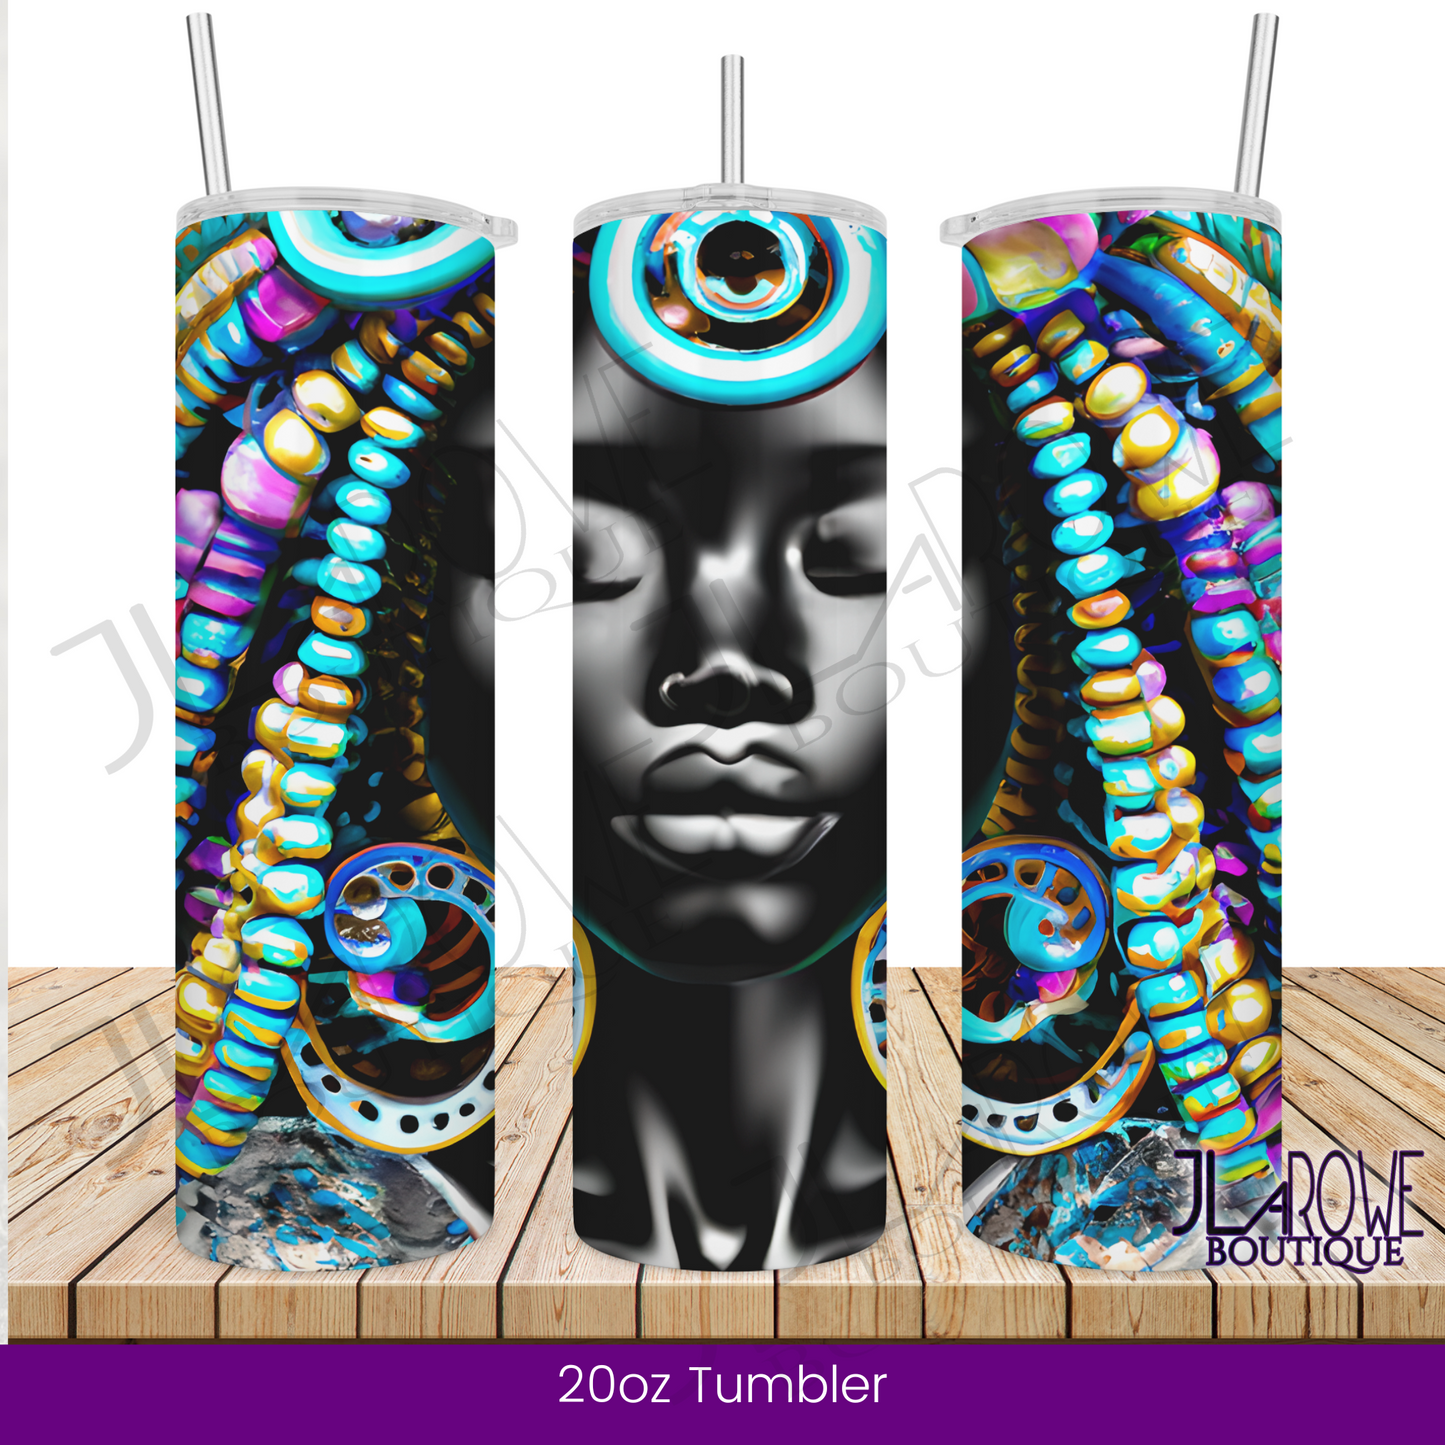 African Princess with colorful hair beads - 20oz Tumbler